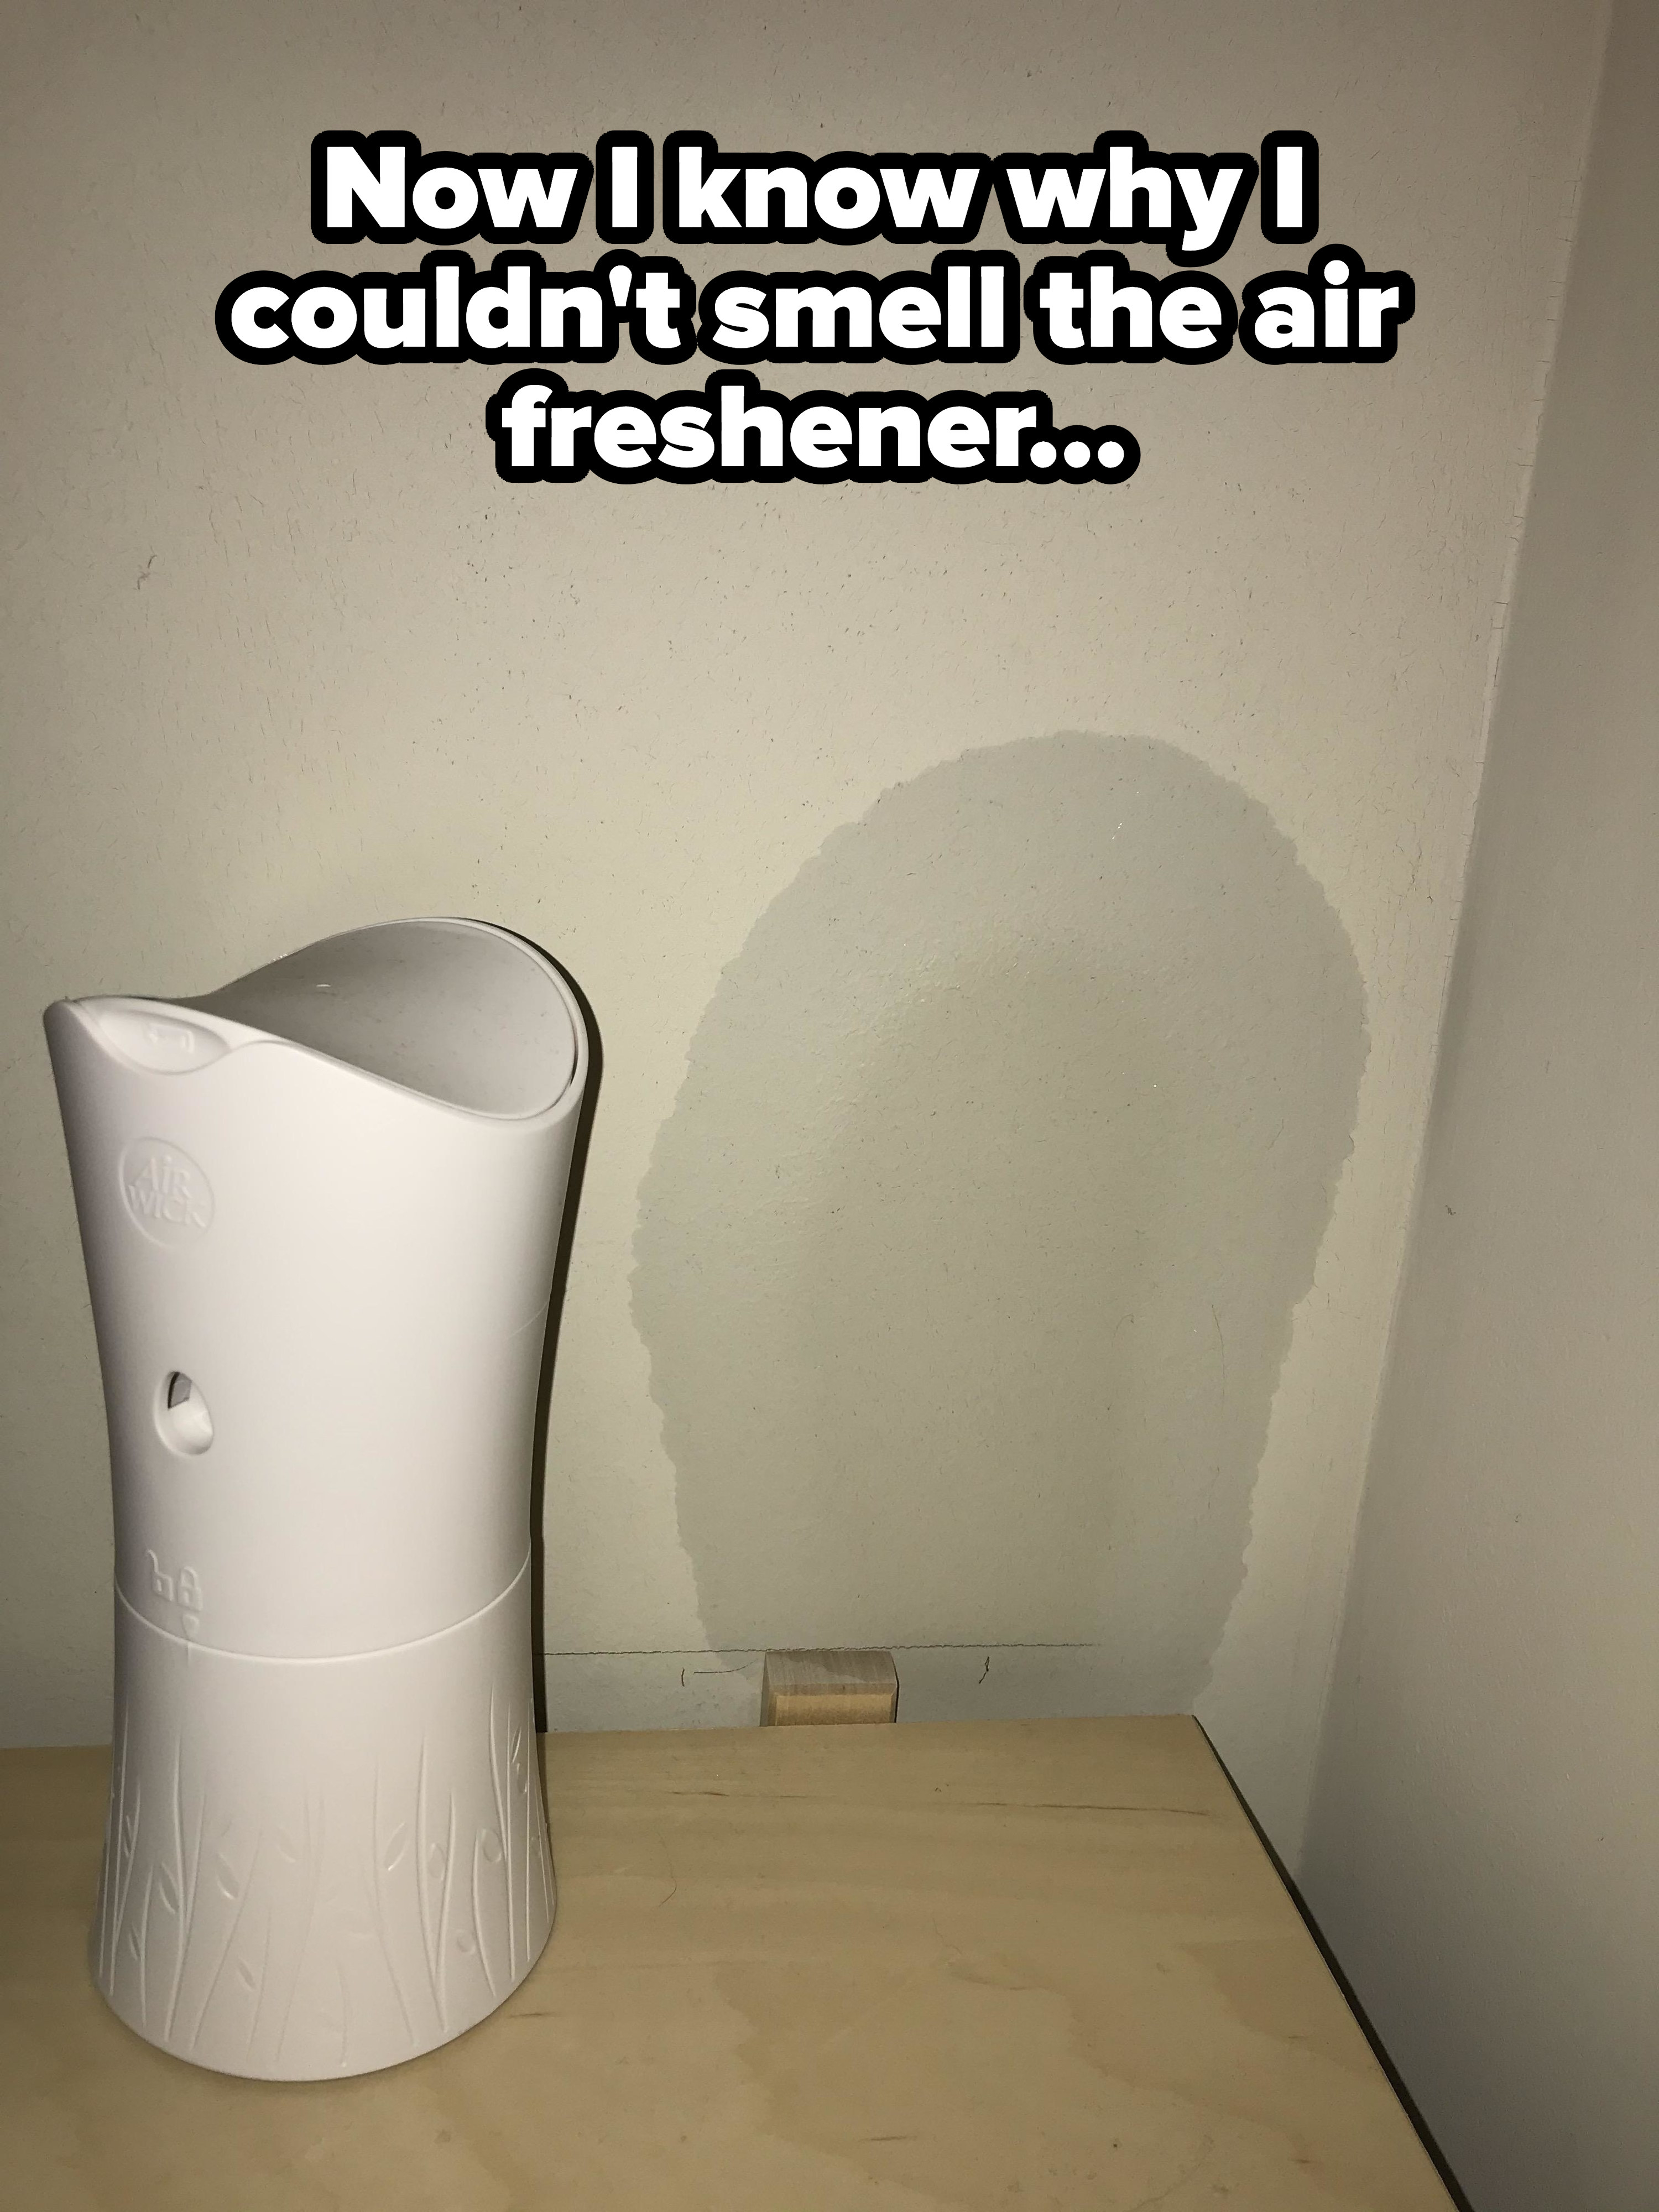 An unopened automatic air freshener